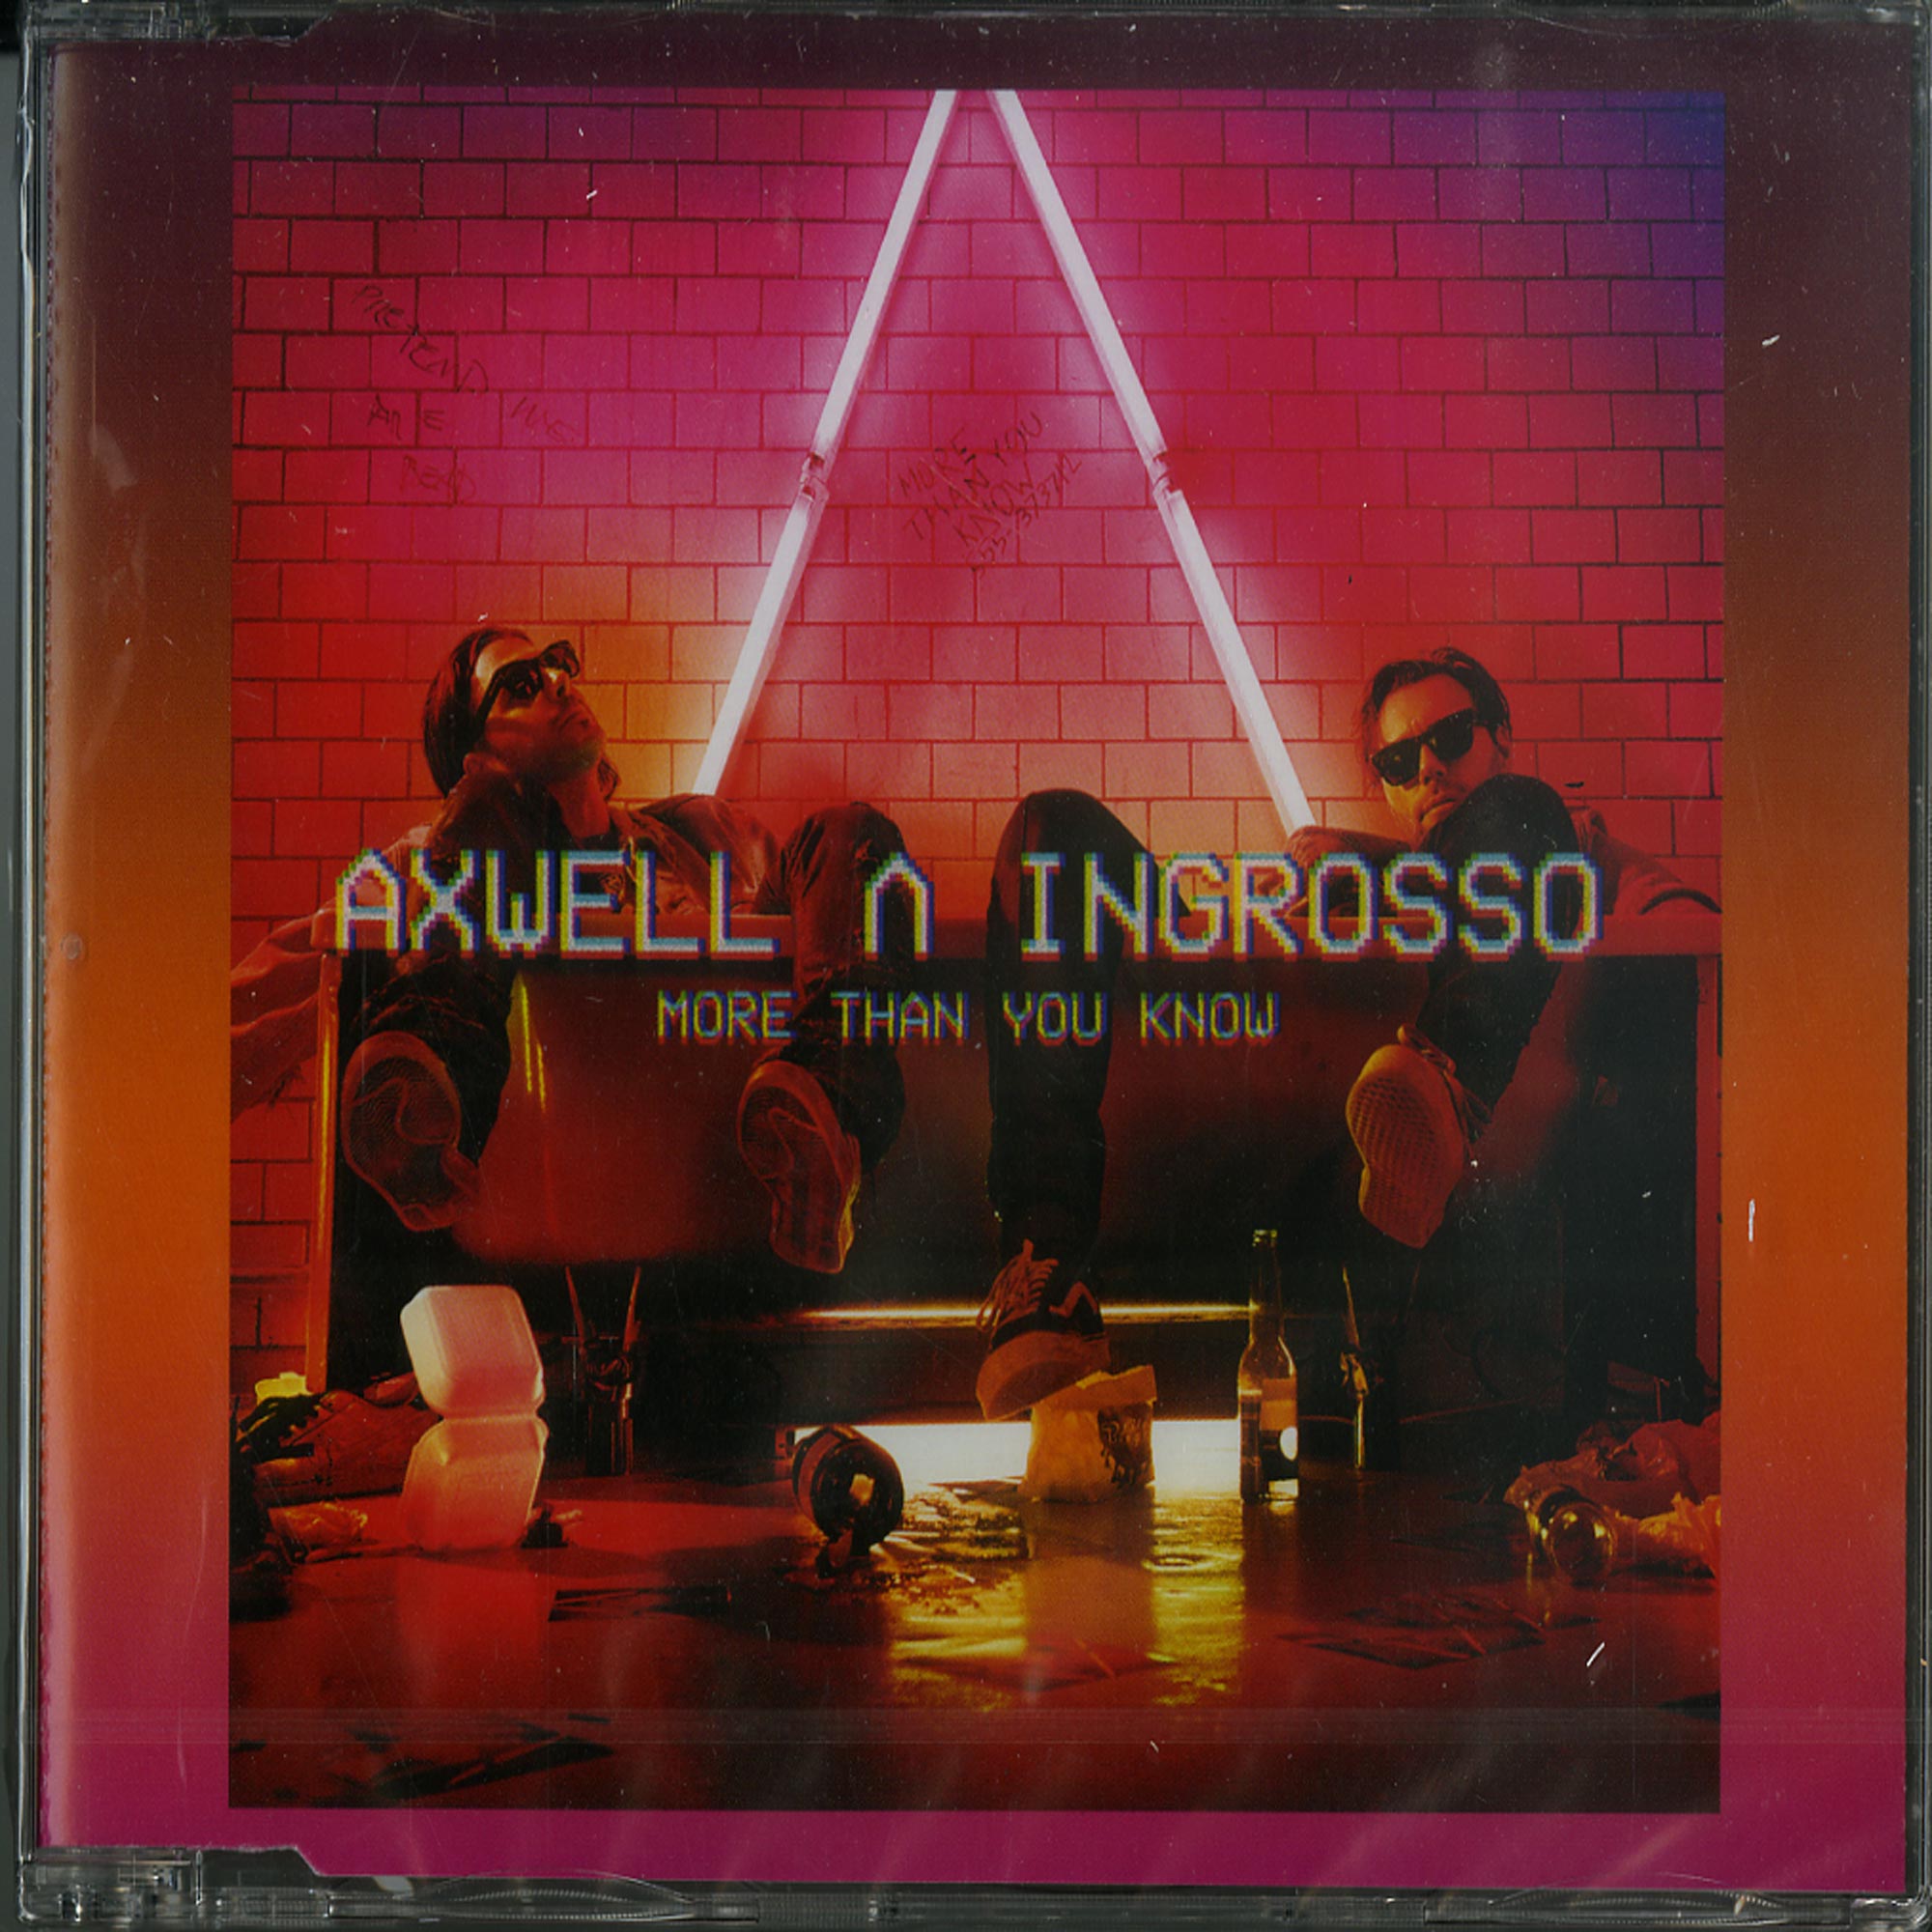 Axwell more than you. More than you know Axwell ingrosso. Axwell λ ingrosso - more than you know. Axwell ingrosso обложка альбома. Axwell ingrosso on my way.